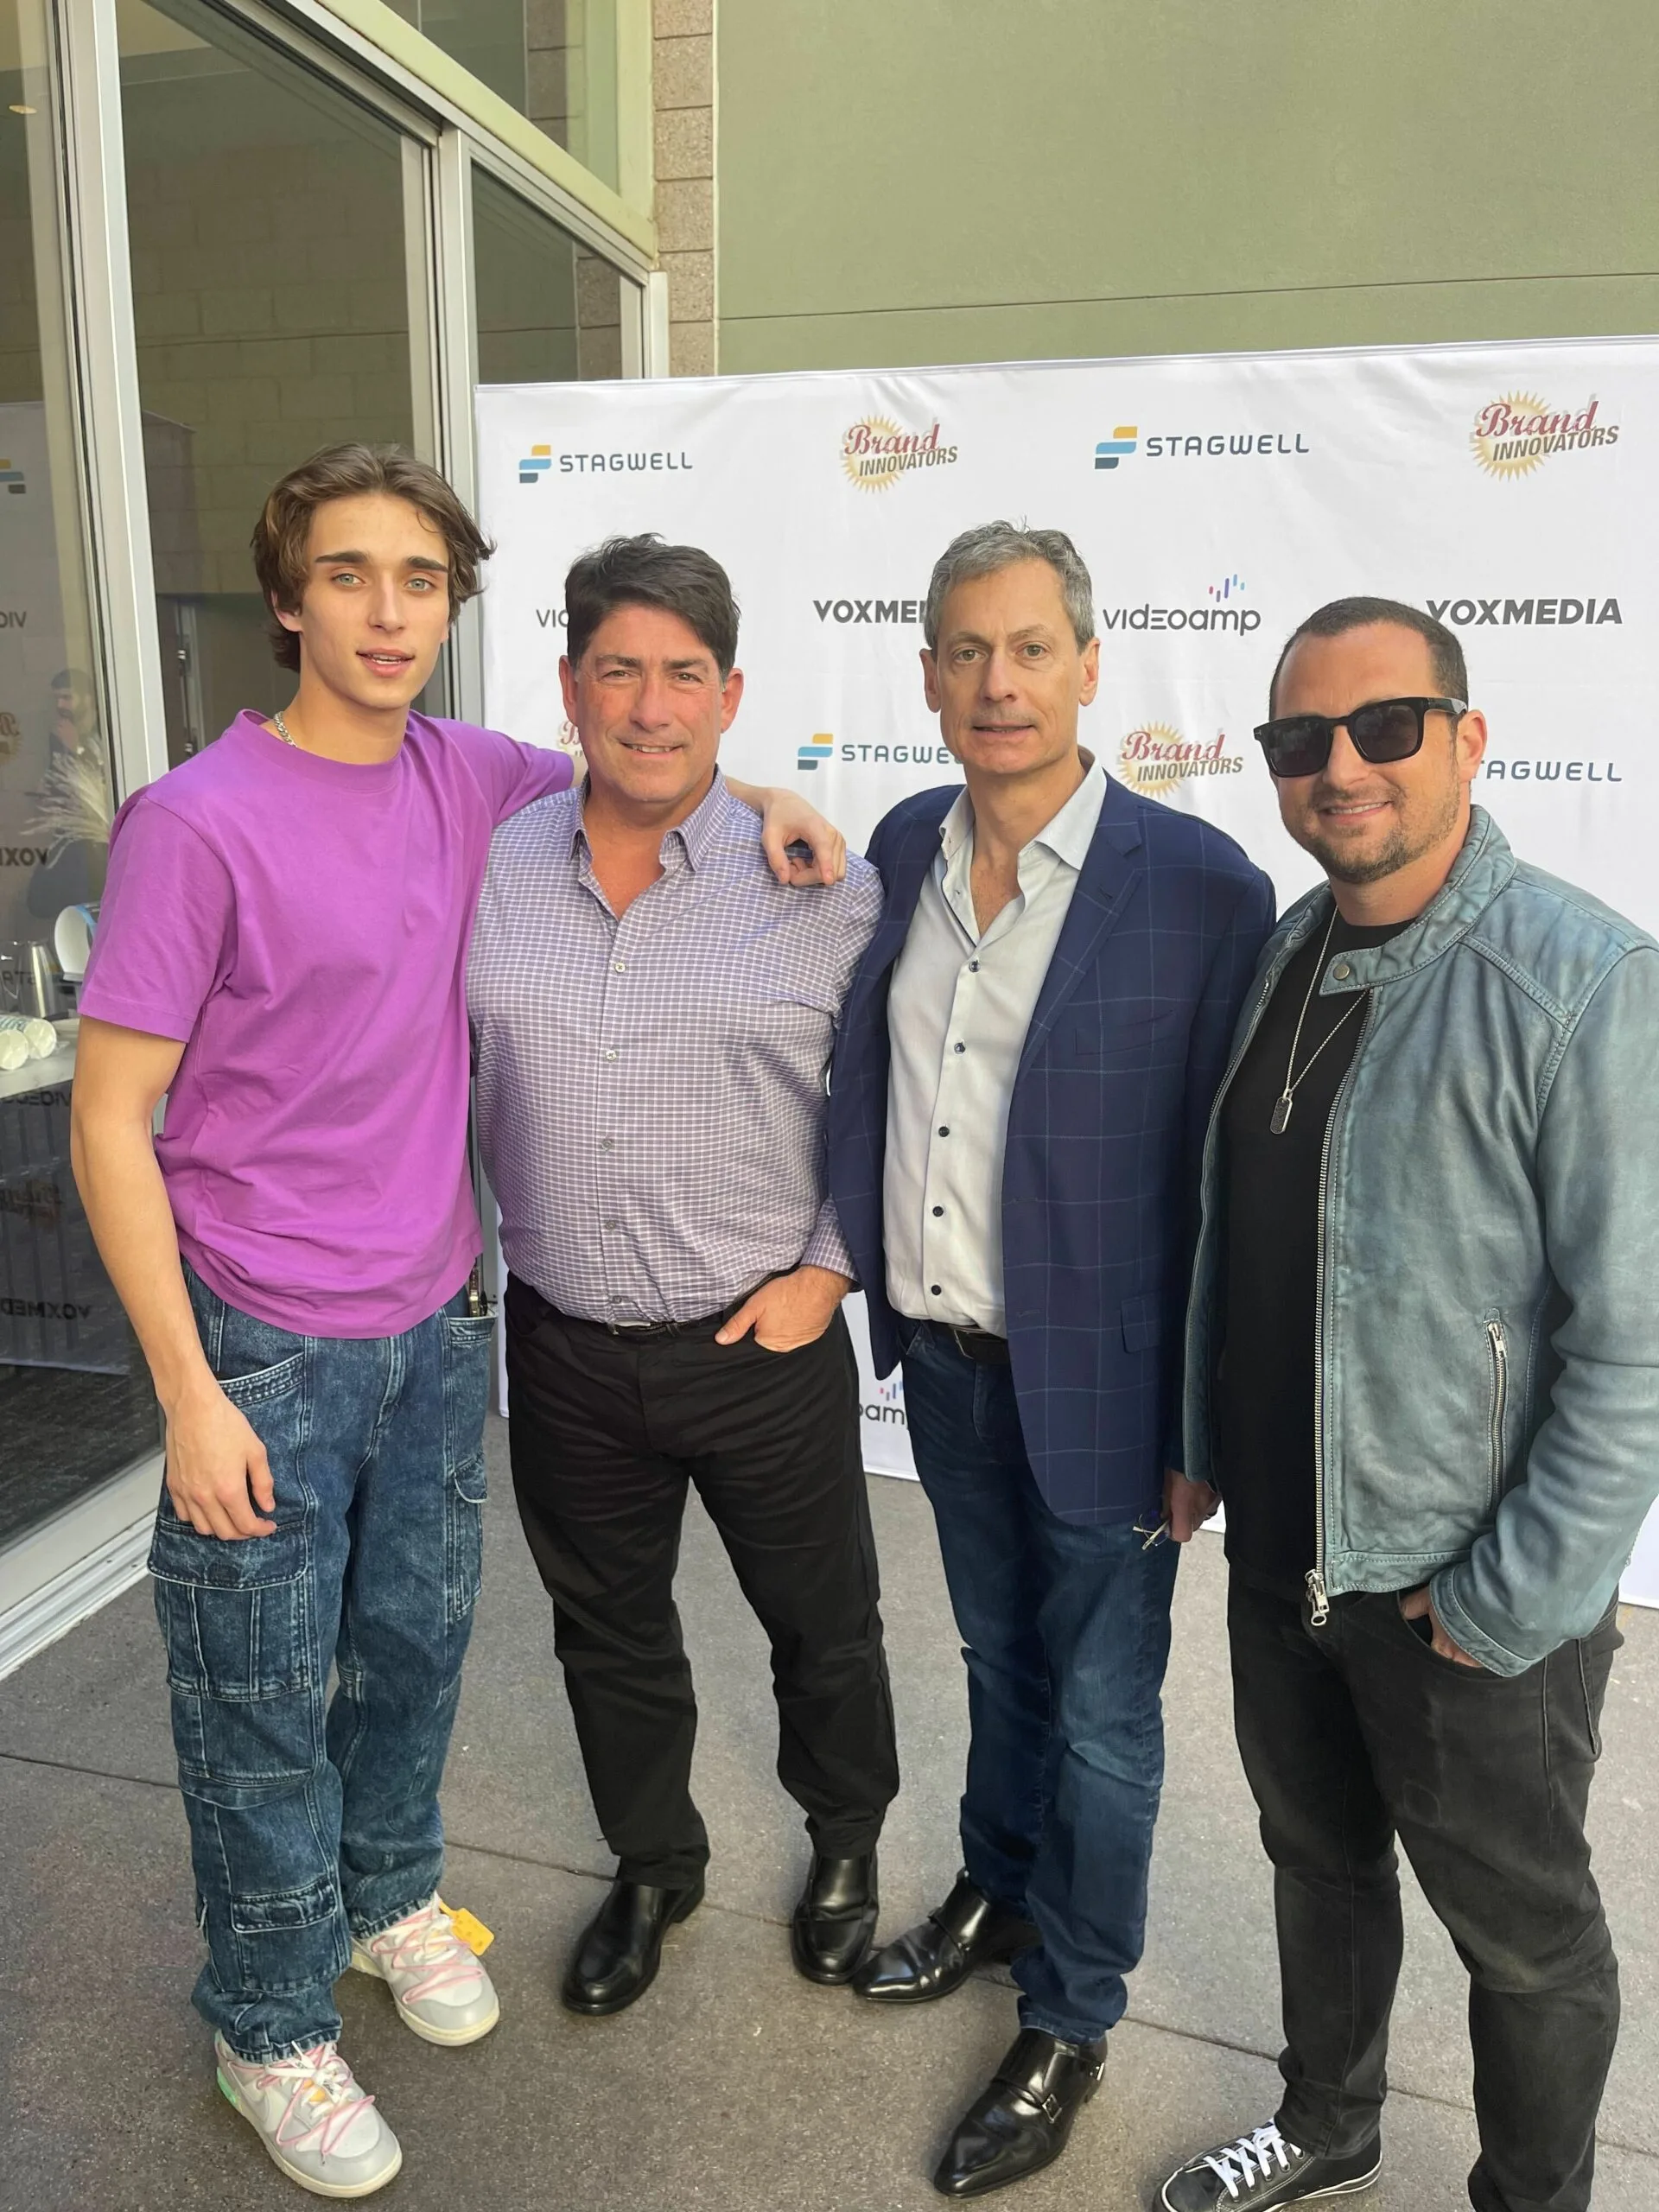 Photo of: Josh Richards, Media Personality / TikTok Influencer & Chairman of CrossCheck Studios, Mike Ford, CEO of Skydeo, Marc Sternberg, Co-Founder, Co-CEO, Brand Innovators, Chris Detert, COO, Influential